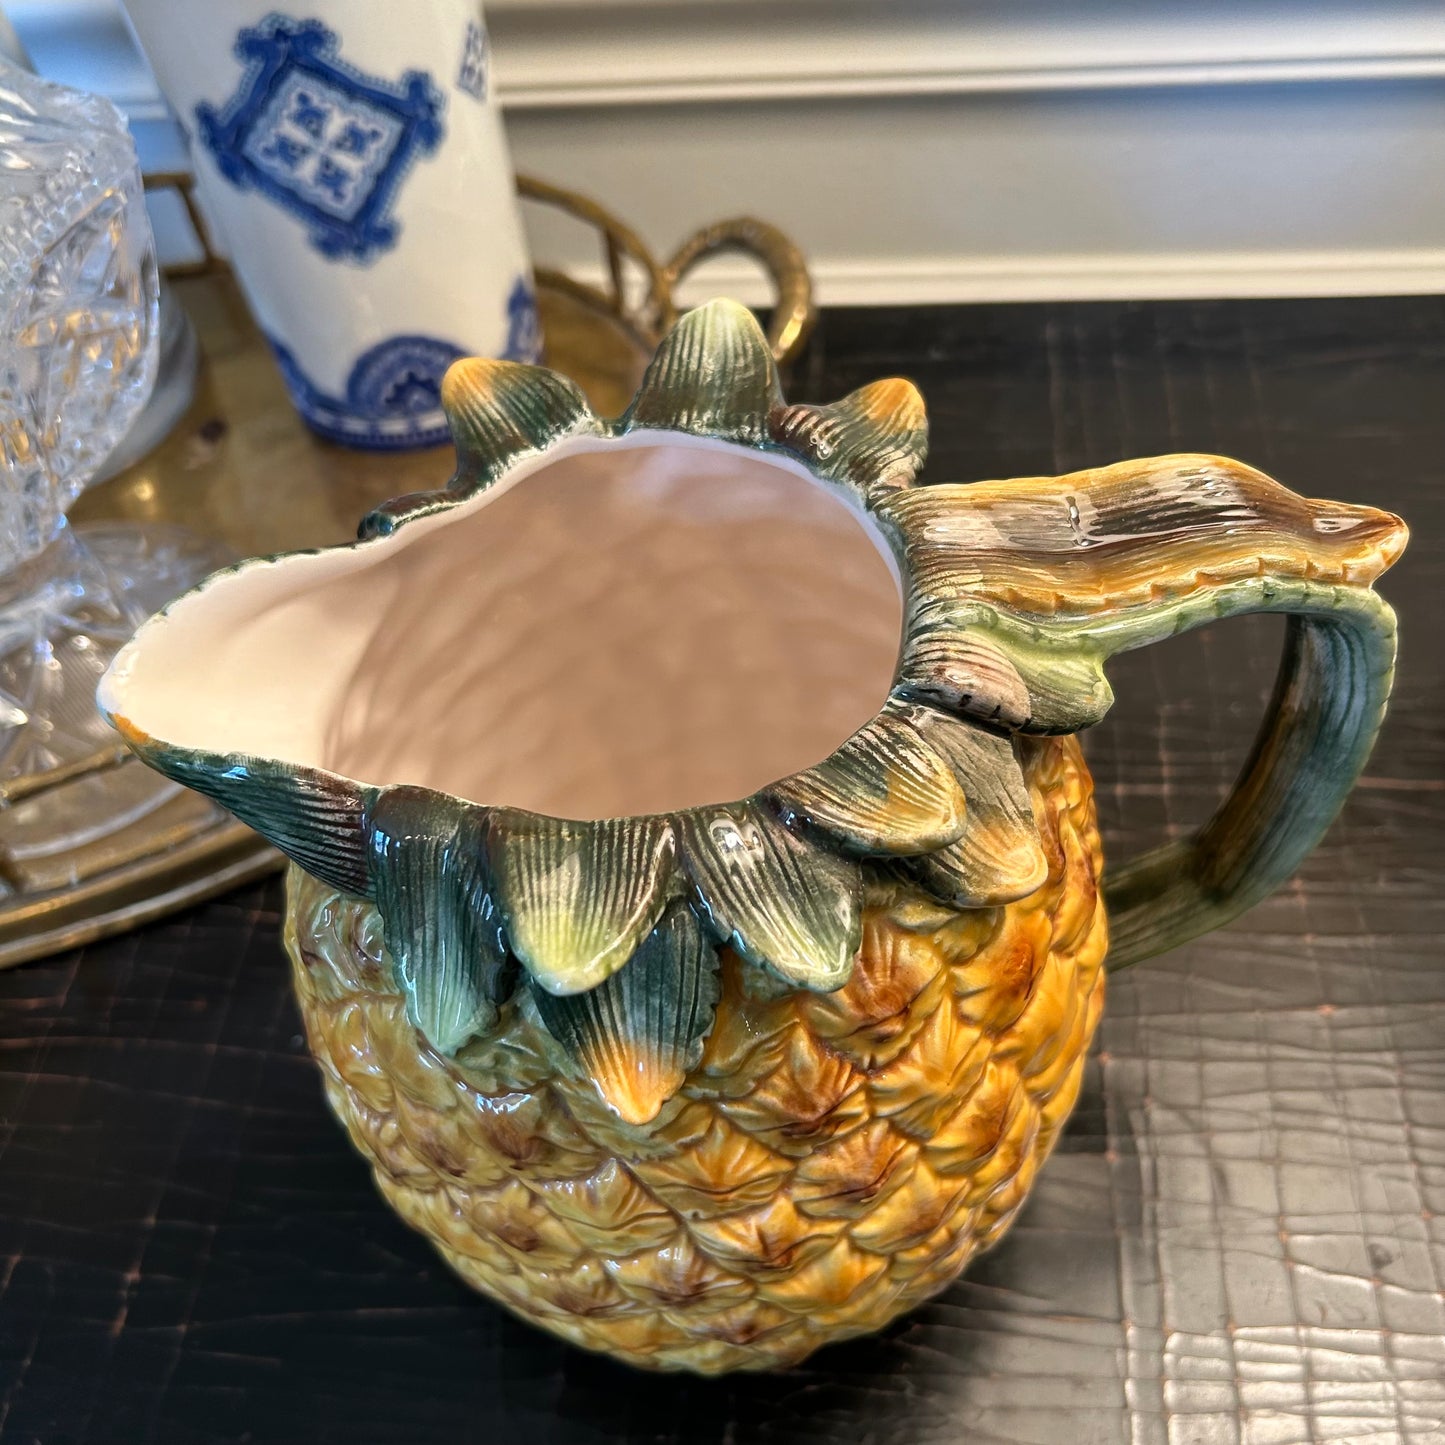 Welcoming vintage majolica style pineapple pitcher